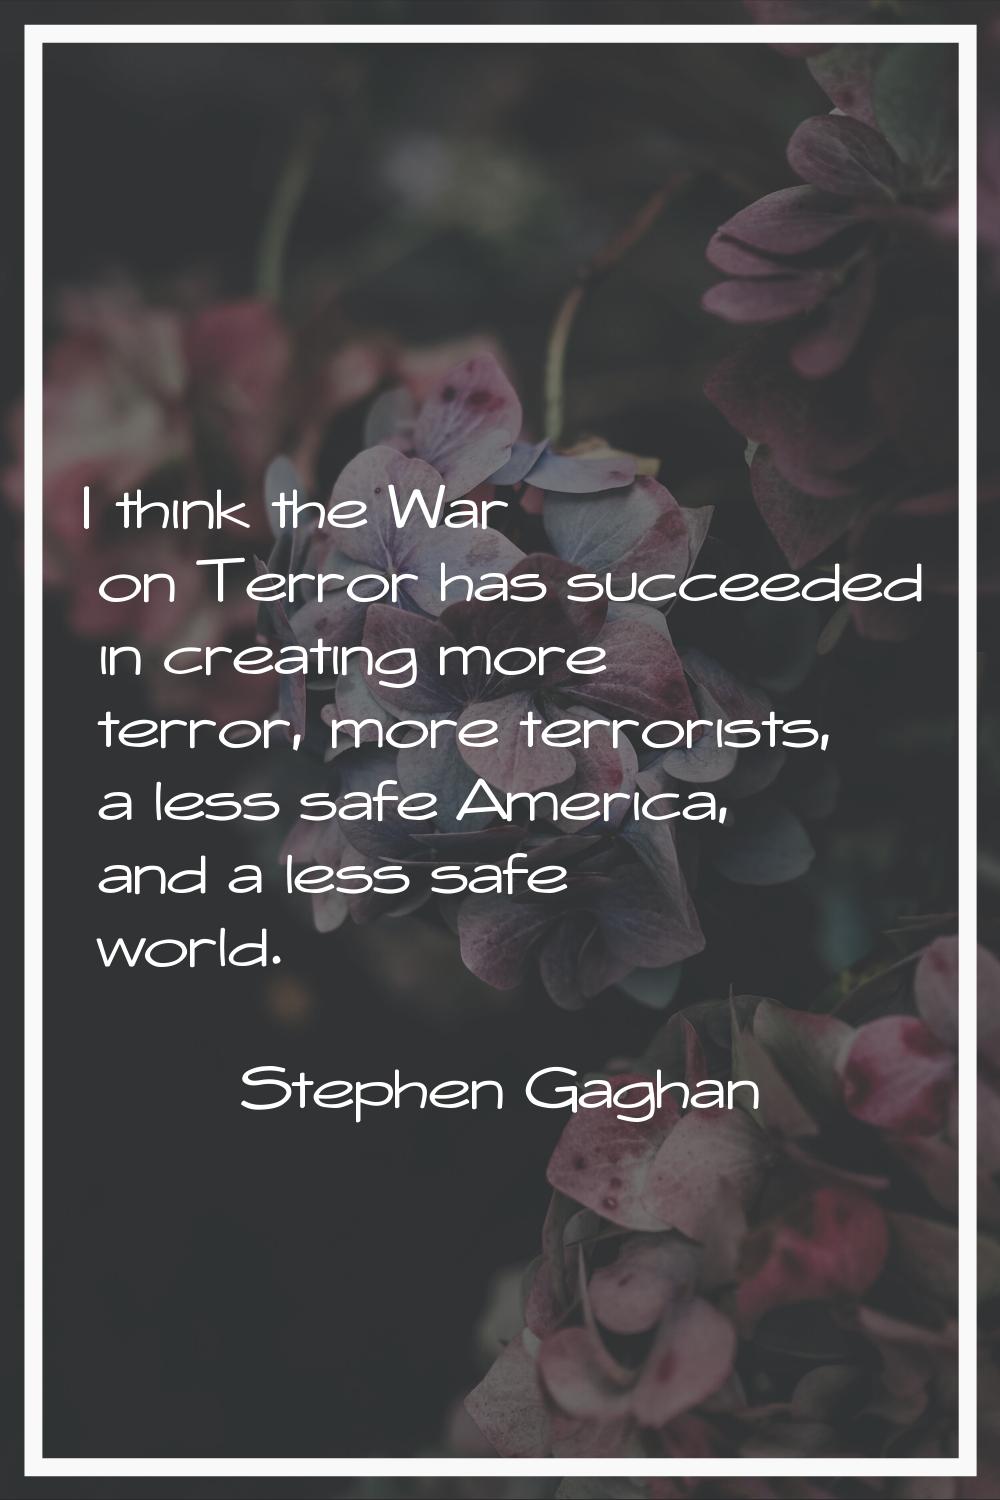 I think the War on Terror has succeeded in creating more terror, more terrorists, a less safe Ameri